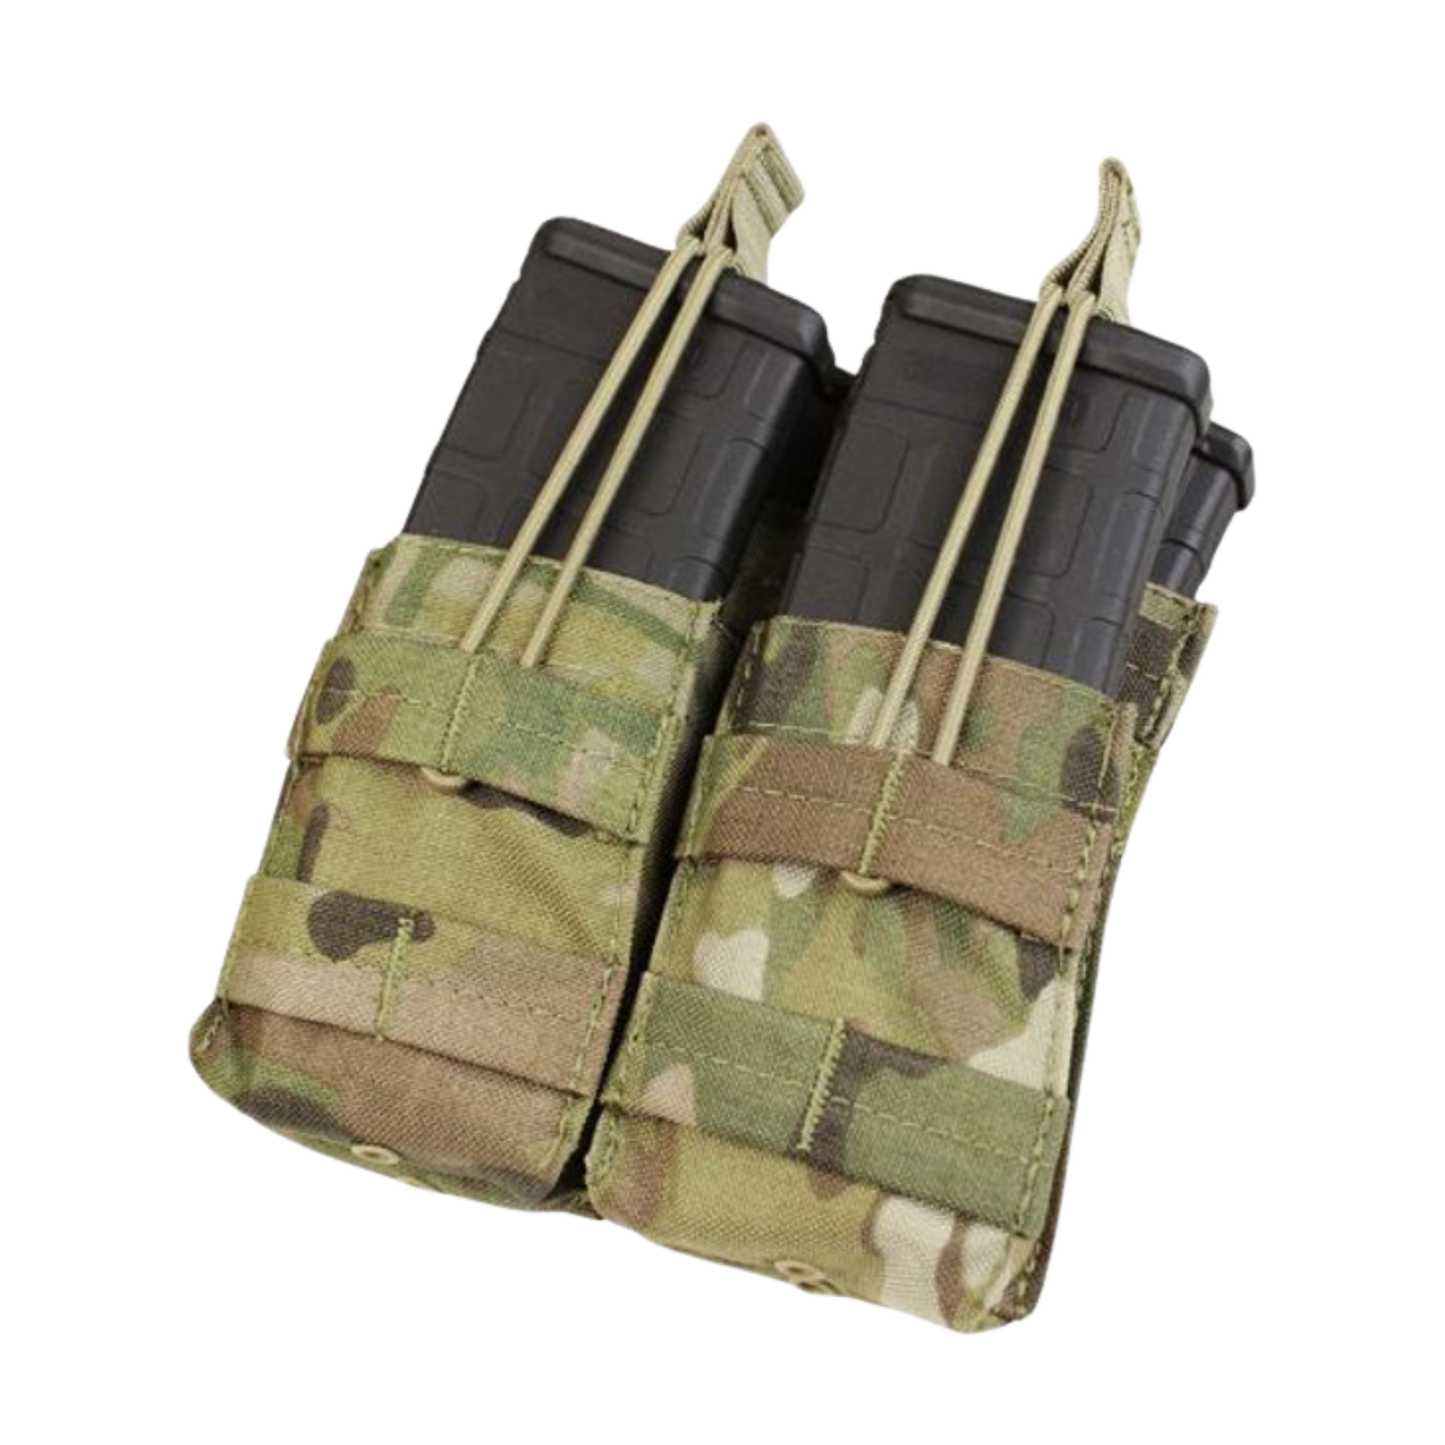 Condor Double Stacker M4 Mag Pouch